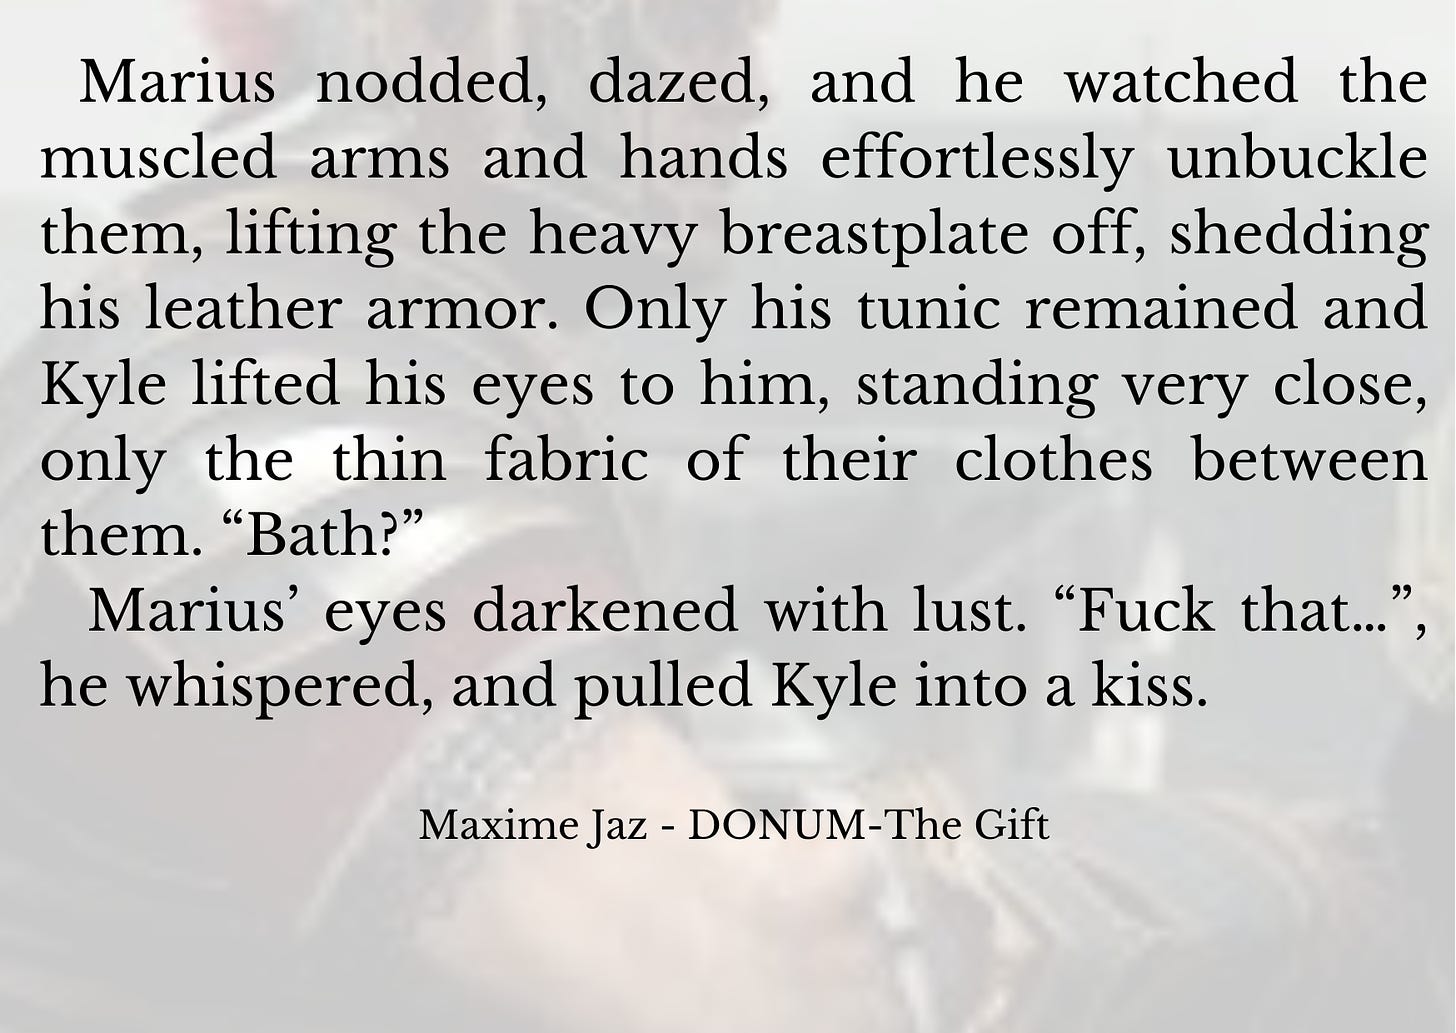 Marius nodded, dazed, and he watched the muscled arms and hands effortlessly unbuckle them, lifting the heavy breastplate off, shedding his leather armor. Only his tunic remained and Kyle lifted his eyes to him, standing very close, only the thin fabric of their clothes between them. “Bath?”   Marius’ eyes darkened with lust. “Fuck that…”, he whispered, and pulled Kyle into a kiss.   Maxime Jaz - DONUM-The Gift